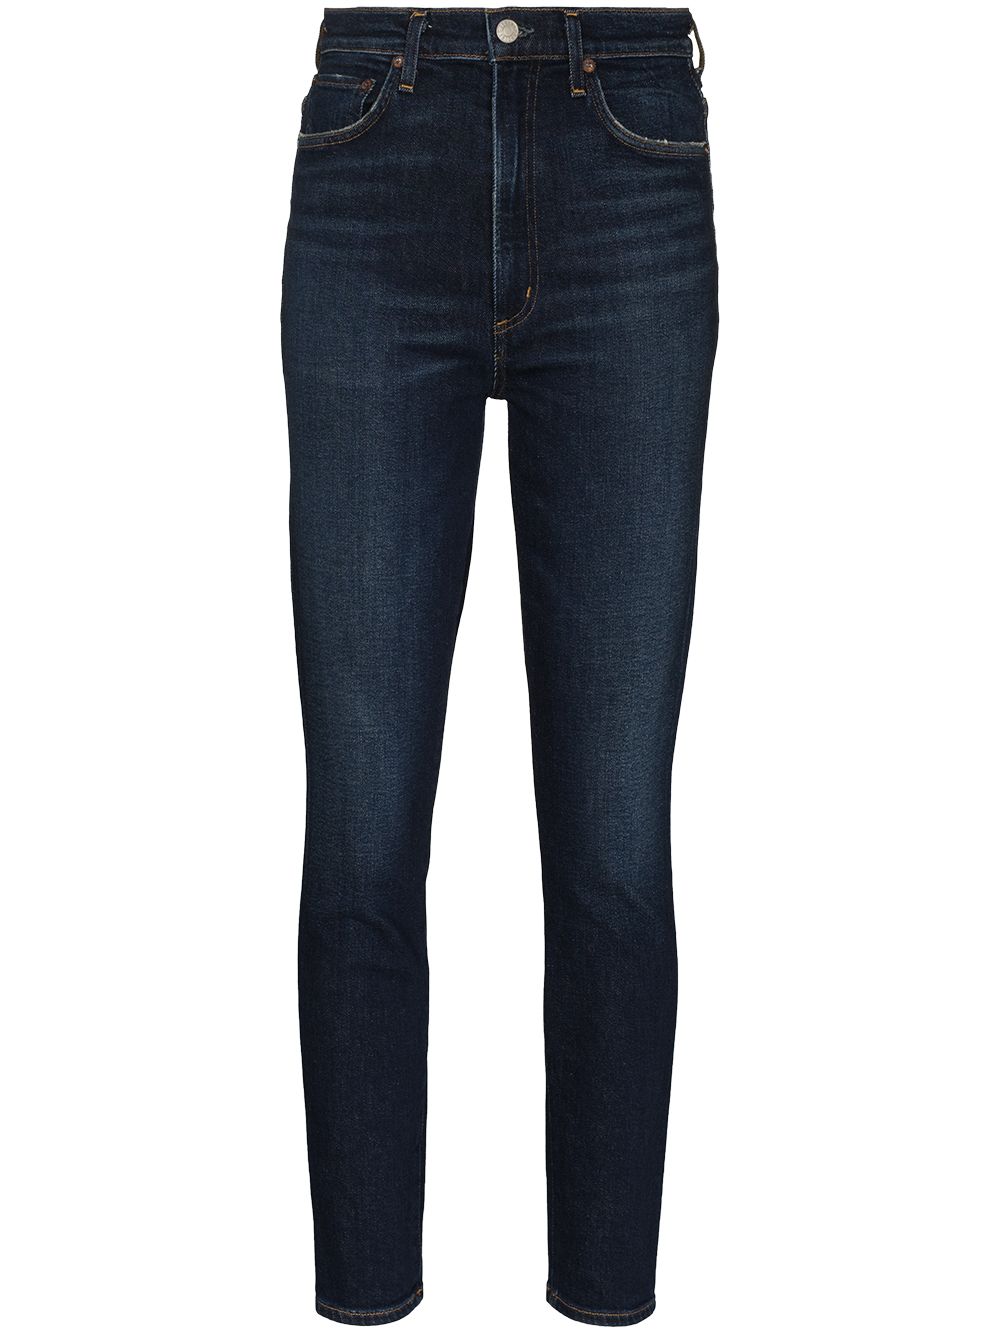 AGOLDE HIGH-RISE SKINNY JEANS